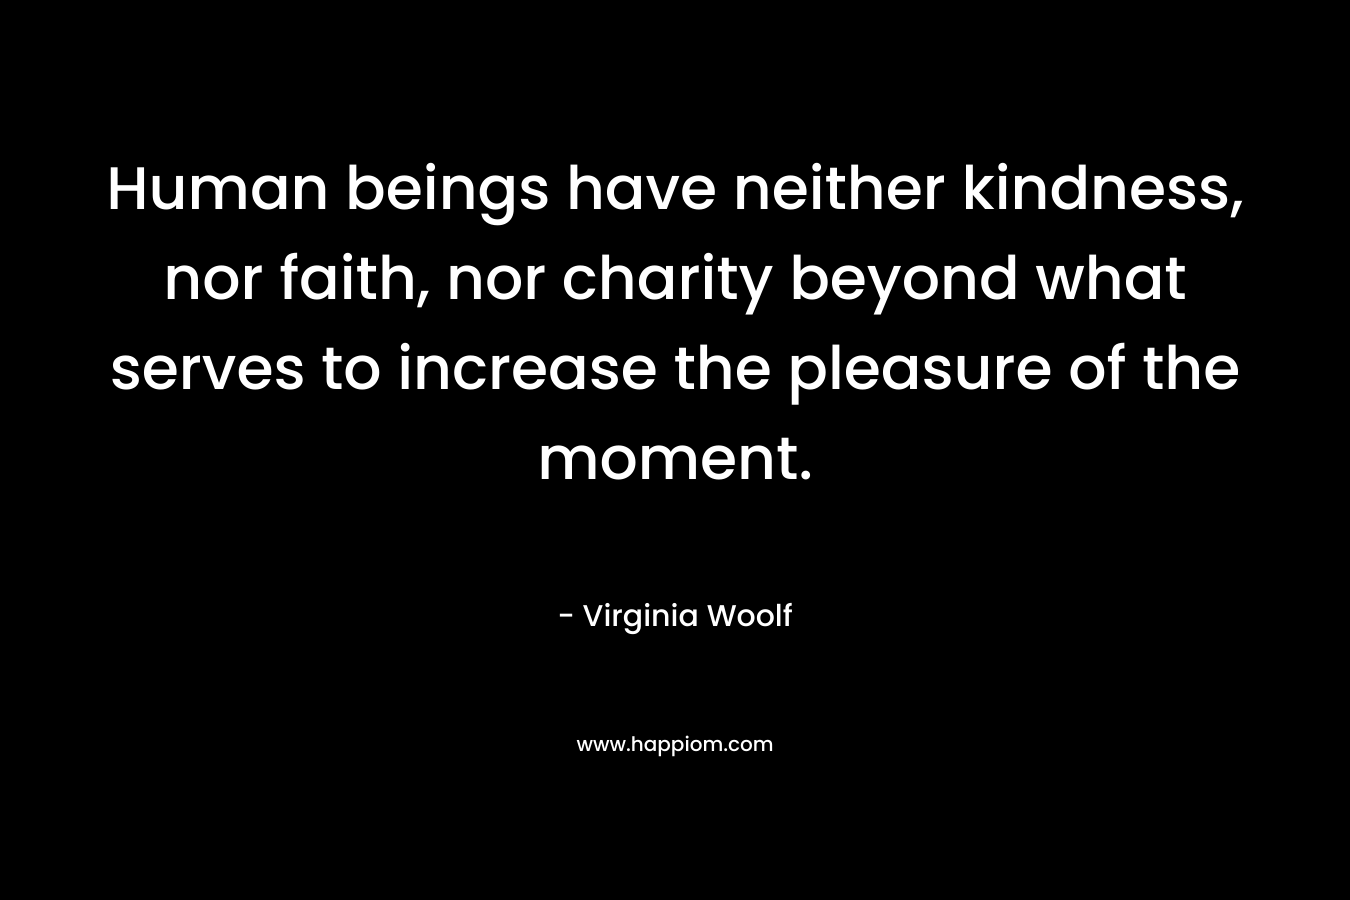 Human beings have neither kindness, nor faith, nor charity beyond what serves to increase the pleasure of the moment.